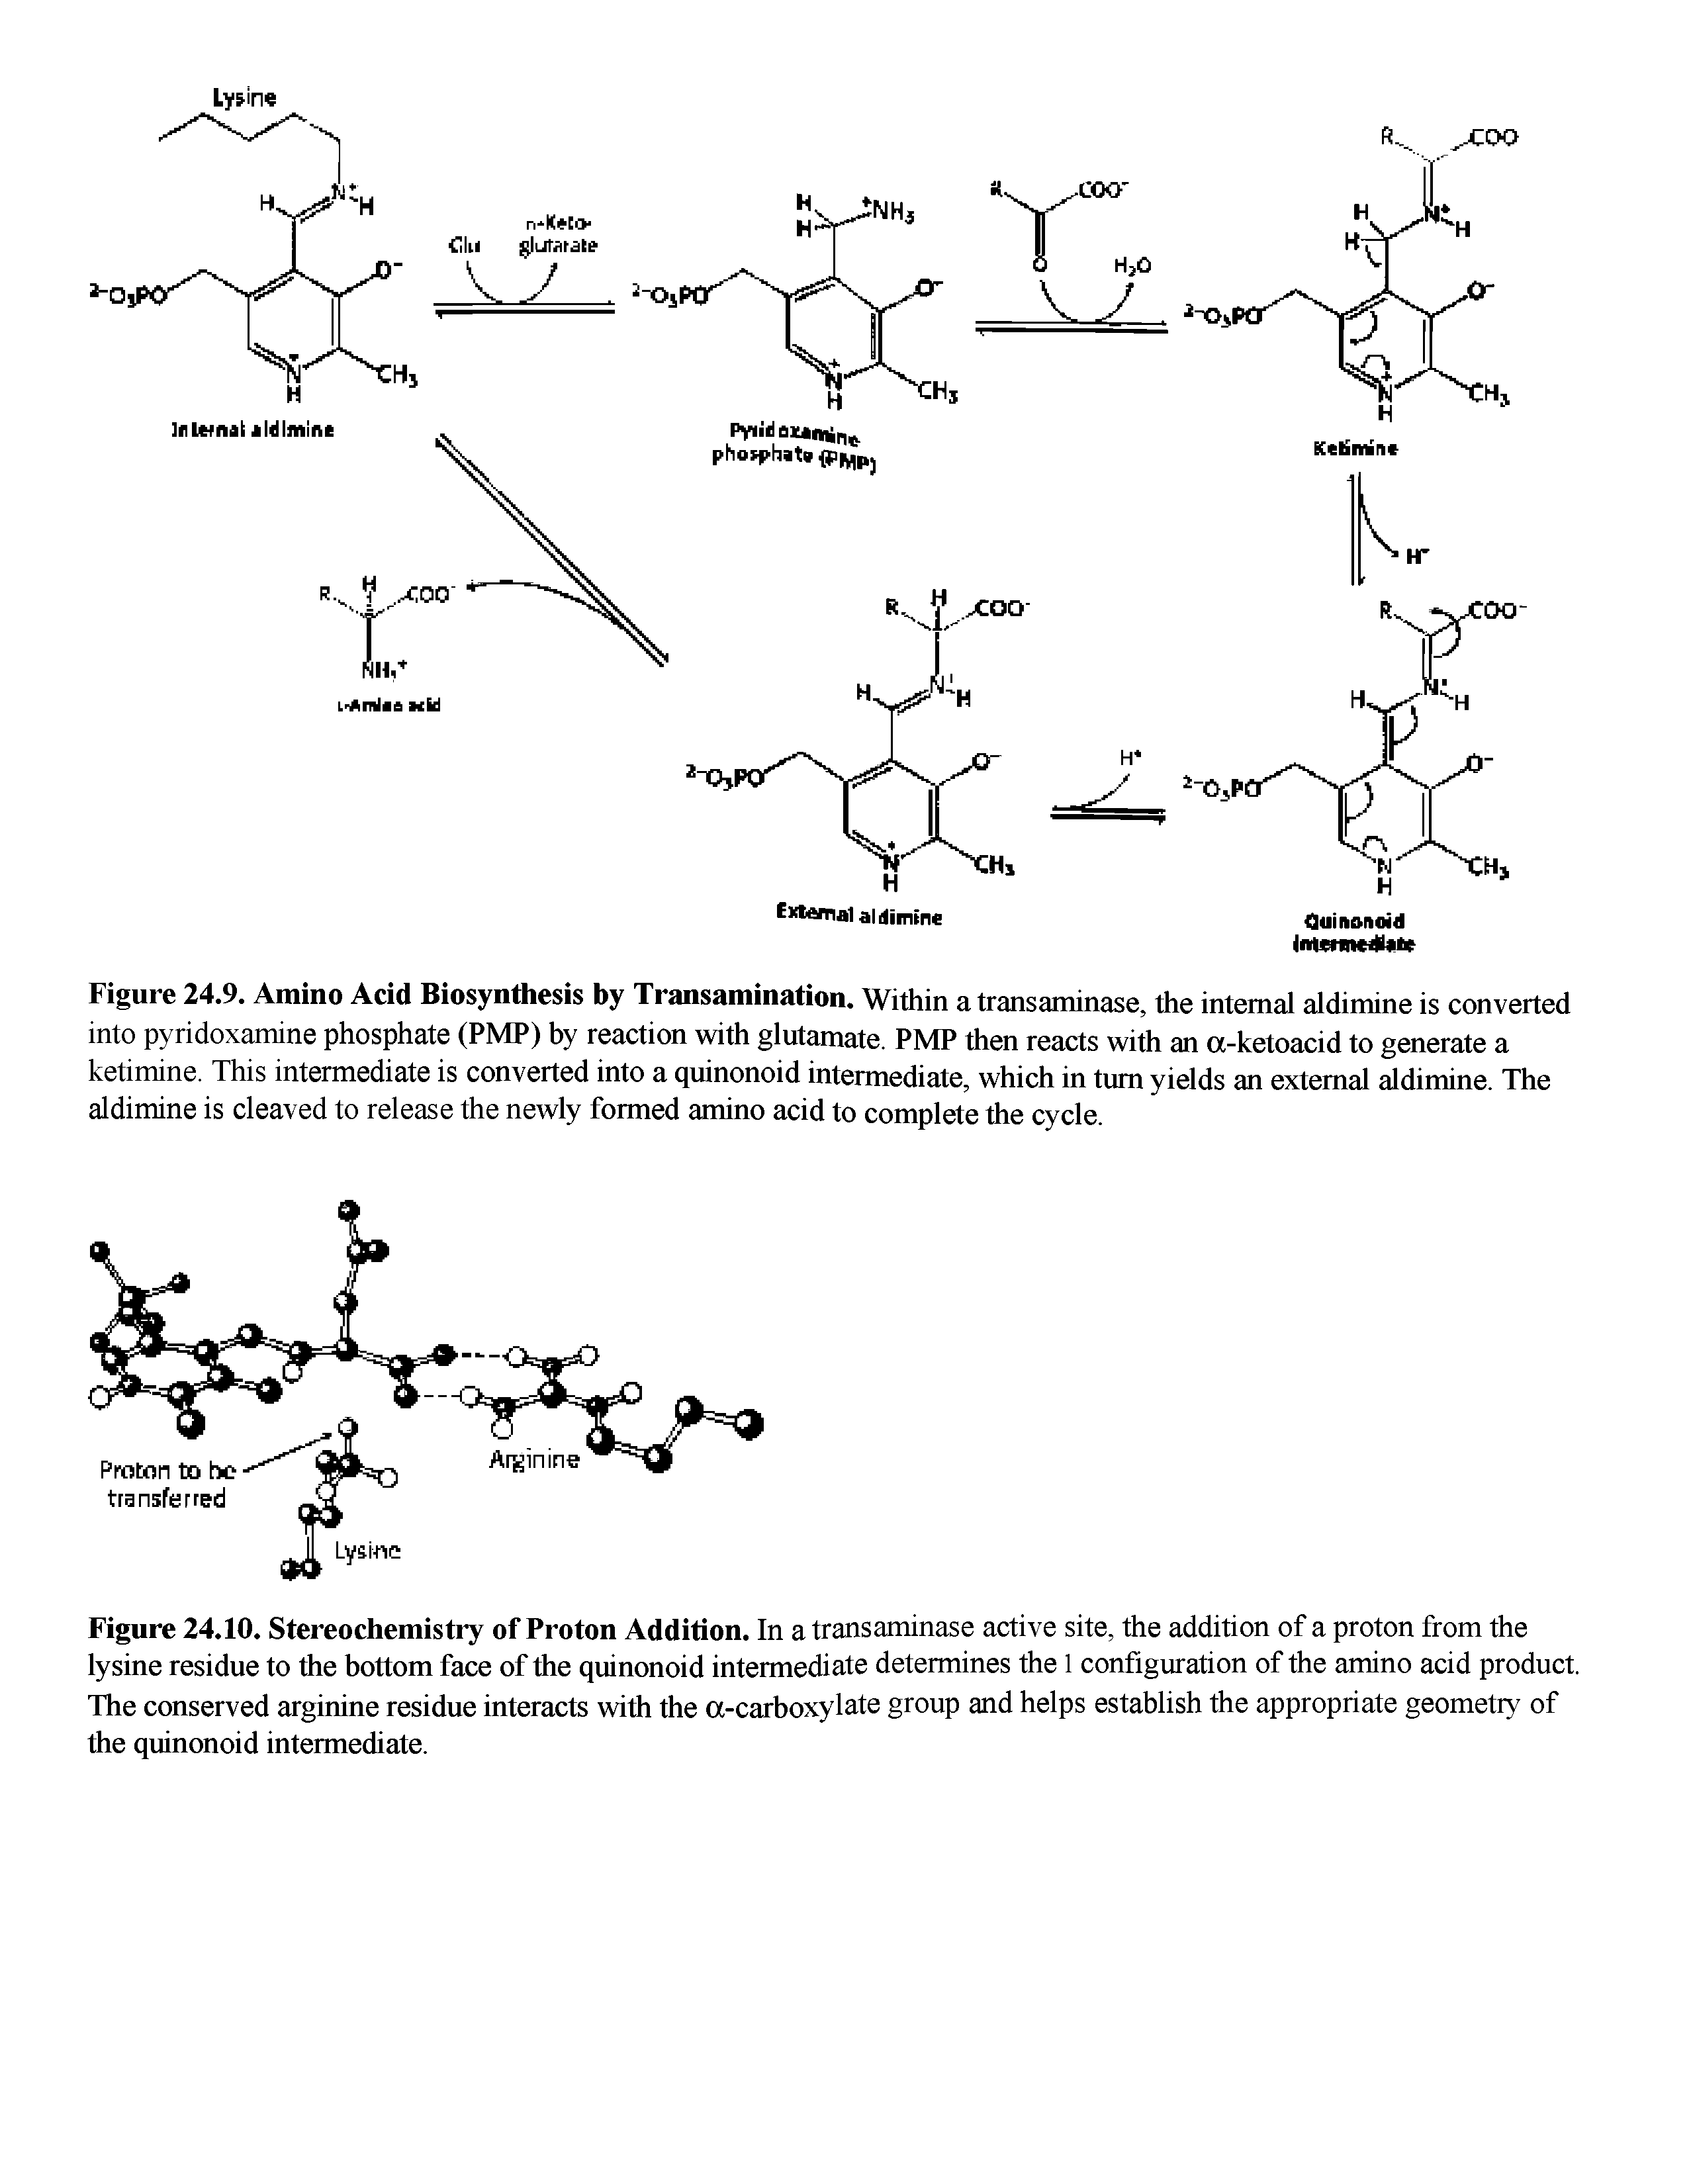 Figure 24.9. Amino Acid Biosynthesis by Transamination. Within a transaminase, the internal aldimine is converted into pyridoxamine phosphate (PMP) by reaction with glutamate. PMP then reacts with an a-ketoacid to generate a ketimine. This intermediate is converted into a quinonoid intermediate, which in turn yields an external aldimine. The aldimine is cleaved to release the newly formed amino acid to complete the cycle.